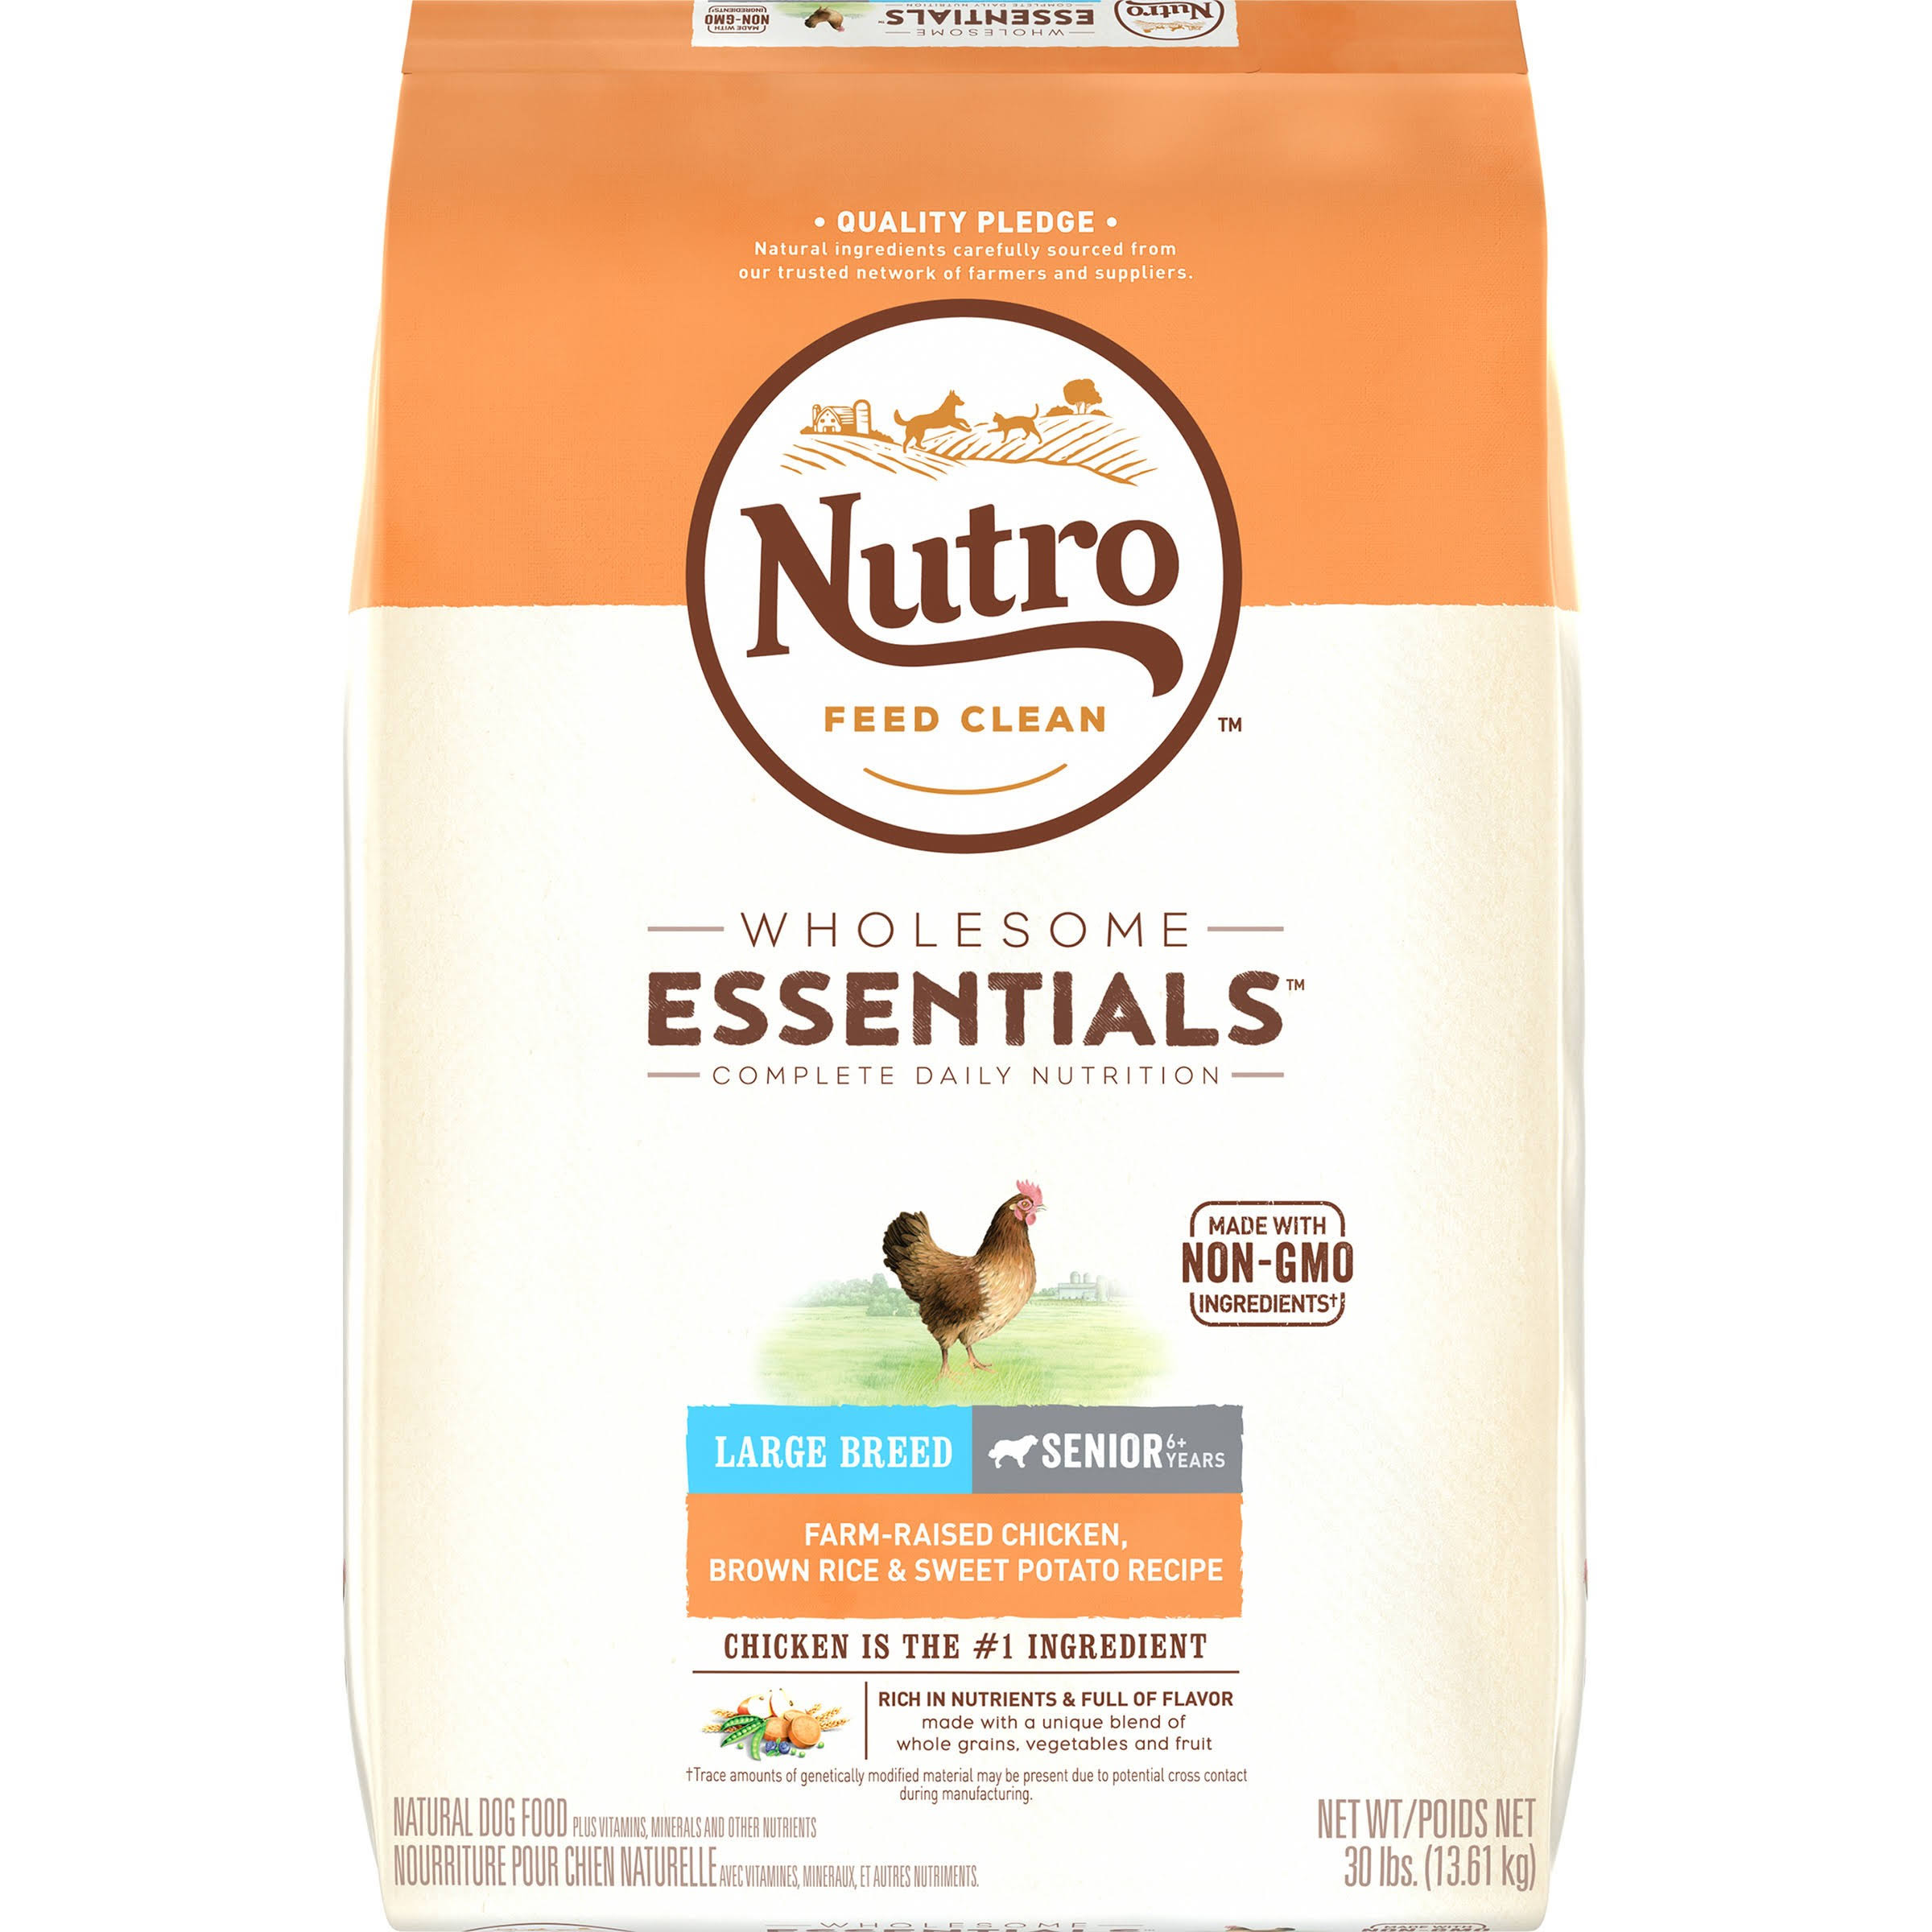 Nutro Large Breed Senior Dog Food - Chicken Whole Brown Rice and Oatmeal Recipe